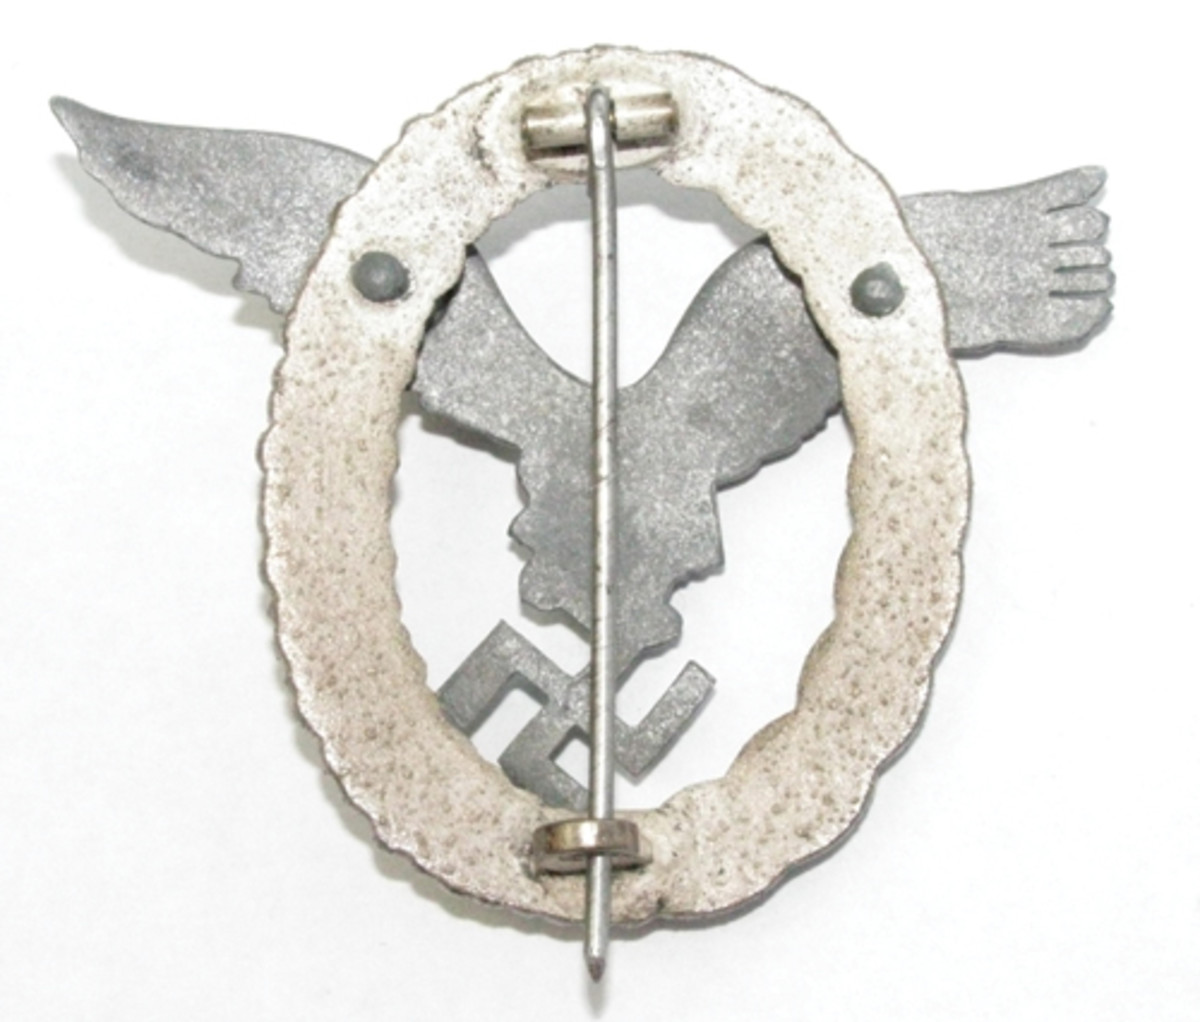  The reverse of a pilot’s badge shows the rivet heads, and attaching pin and “C” hook.